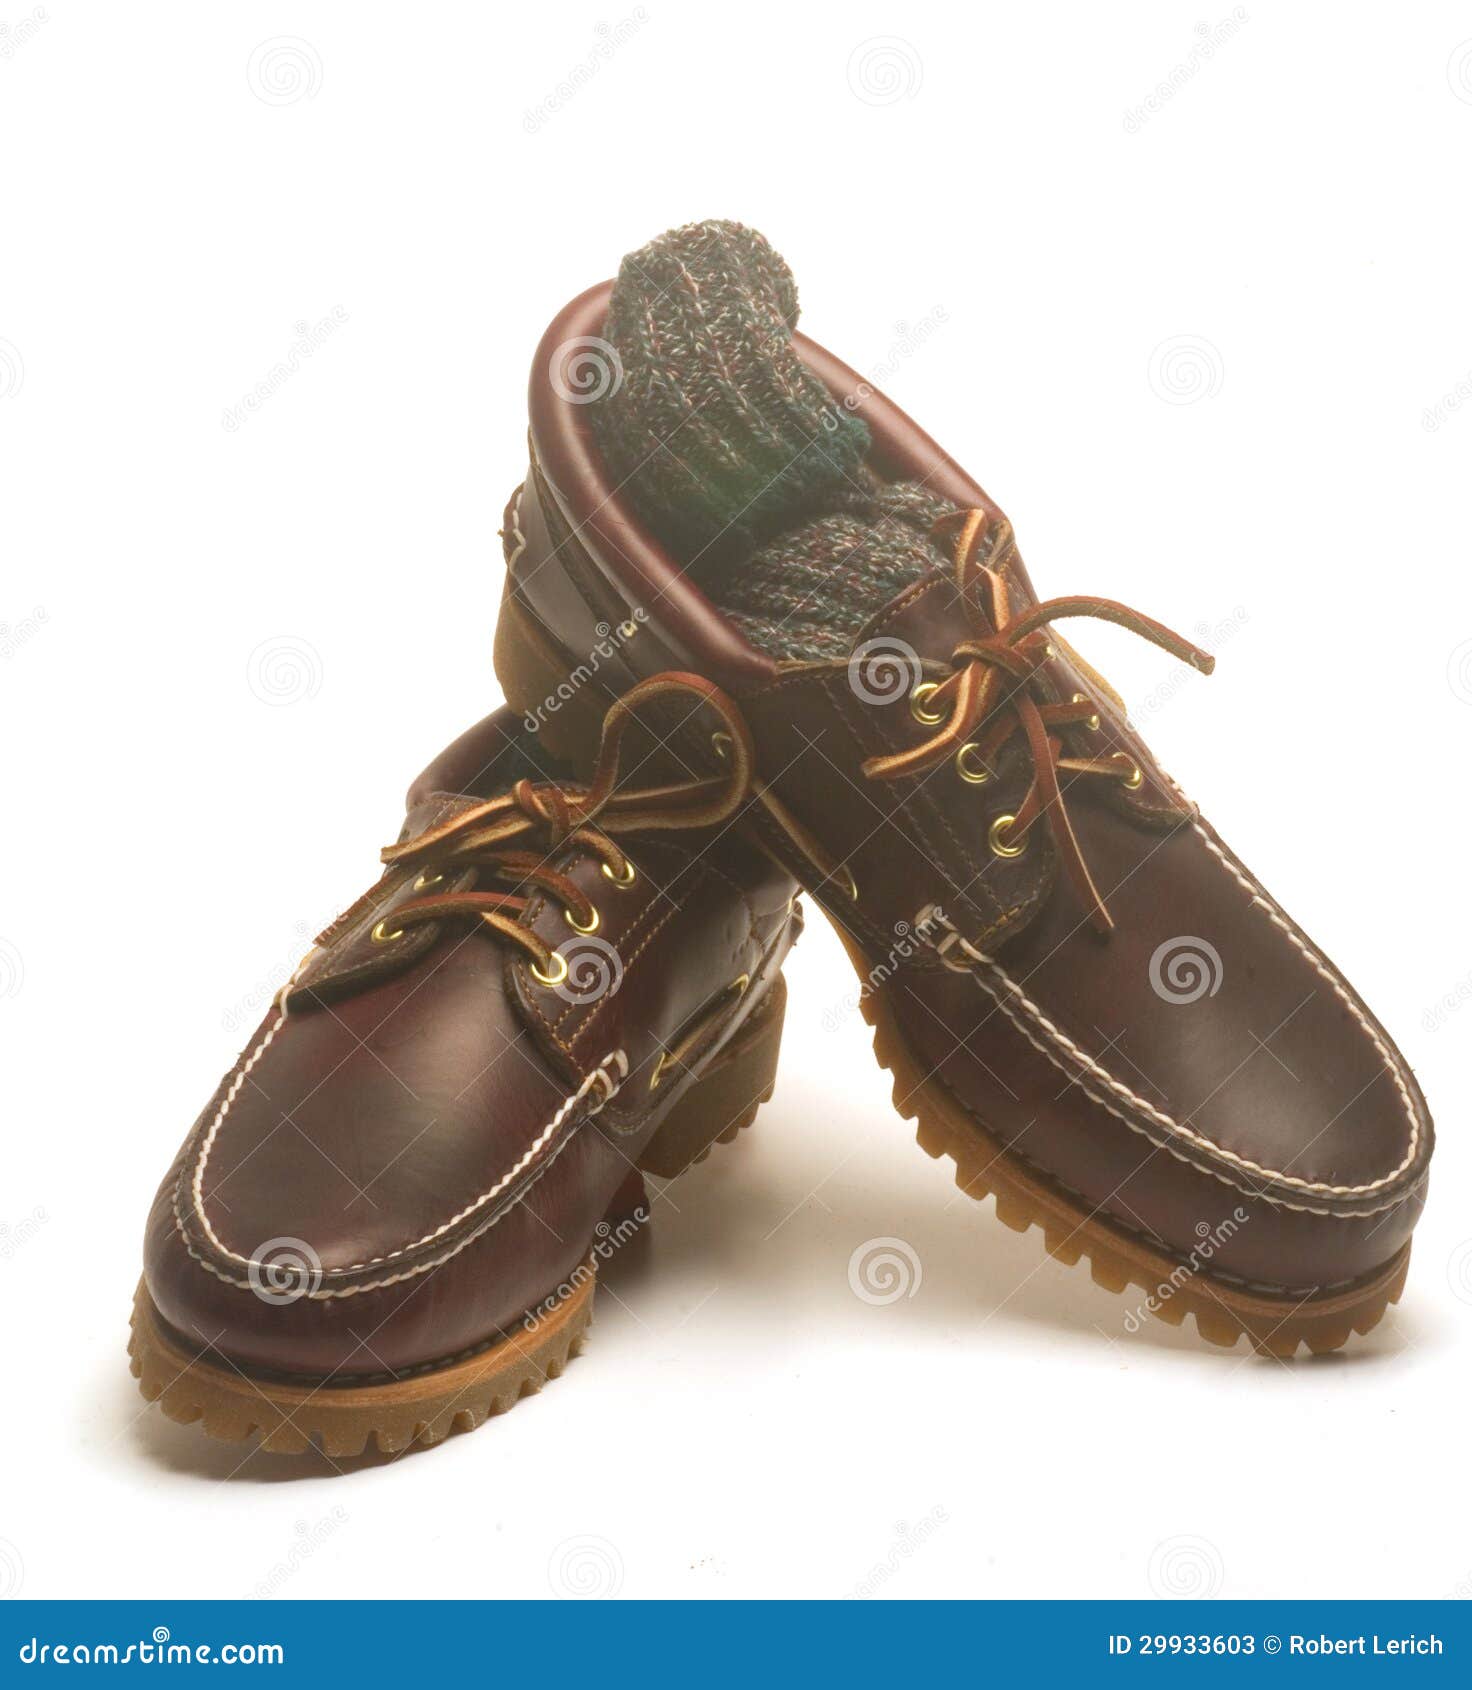 men's rugged casual shoes